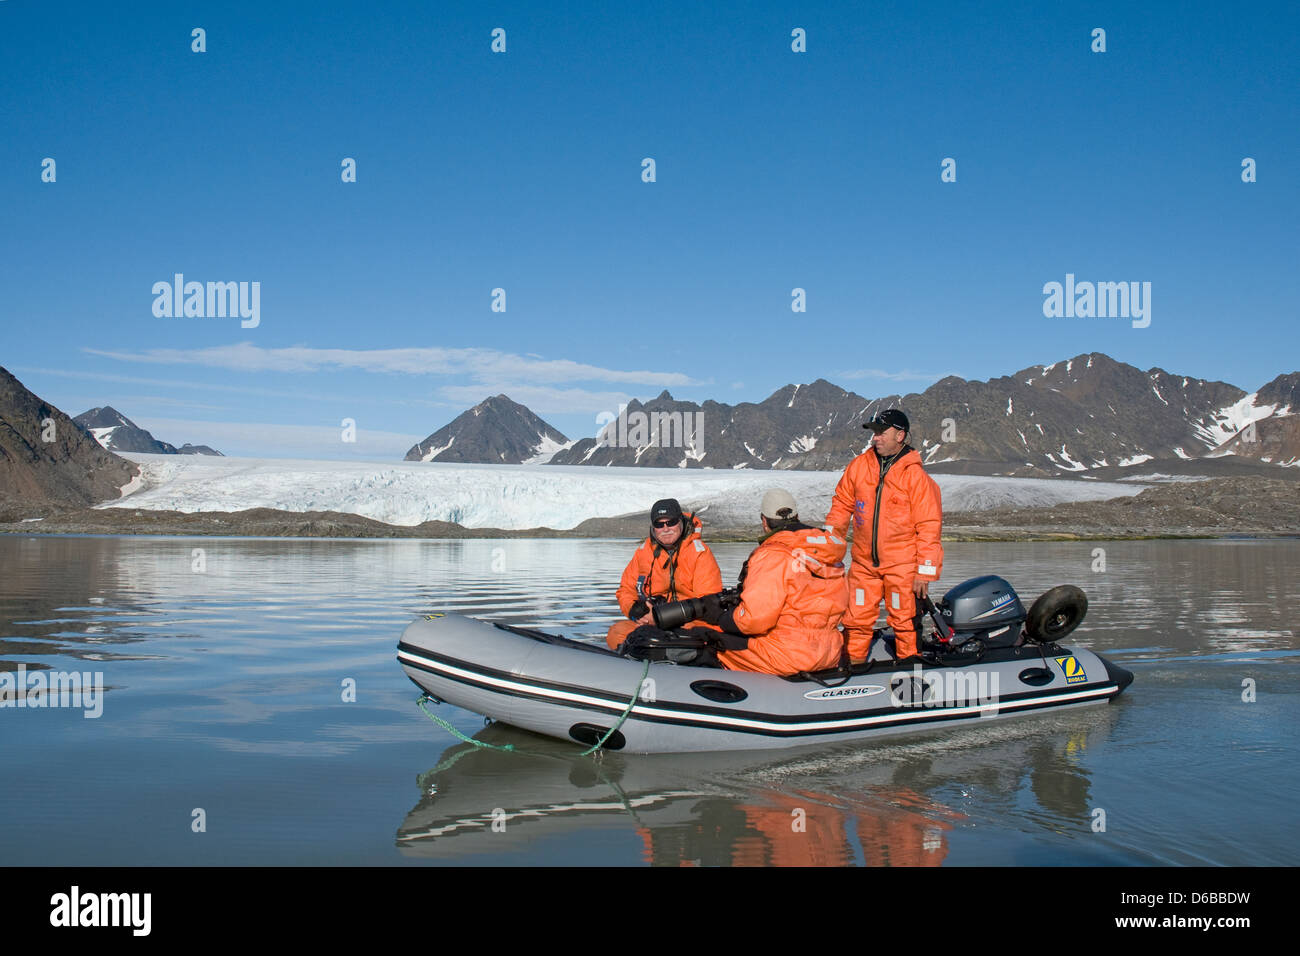 Norway Svalbard Archipelago Spitsbergen Photographers in a zodiac check out a beautiful rugged retreating glacier in summer. Stock Photo